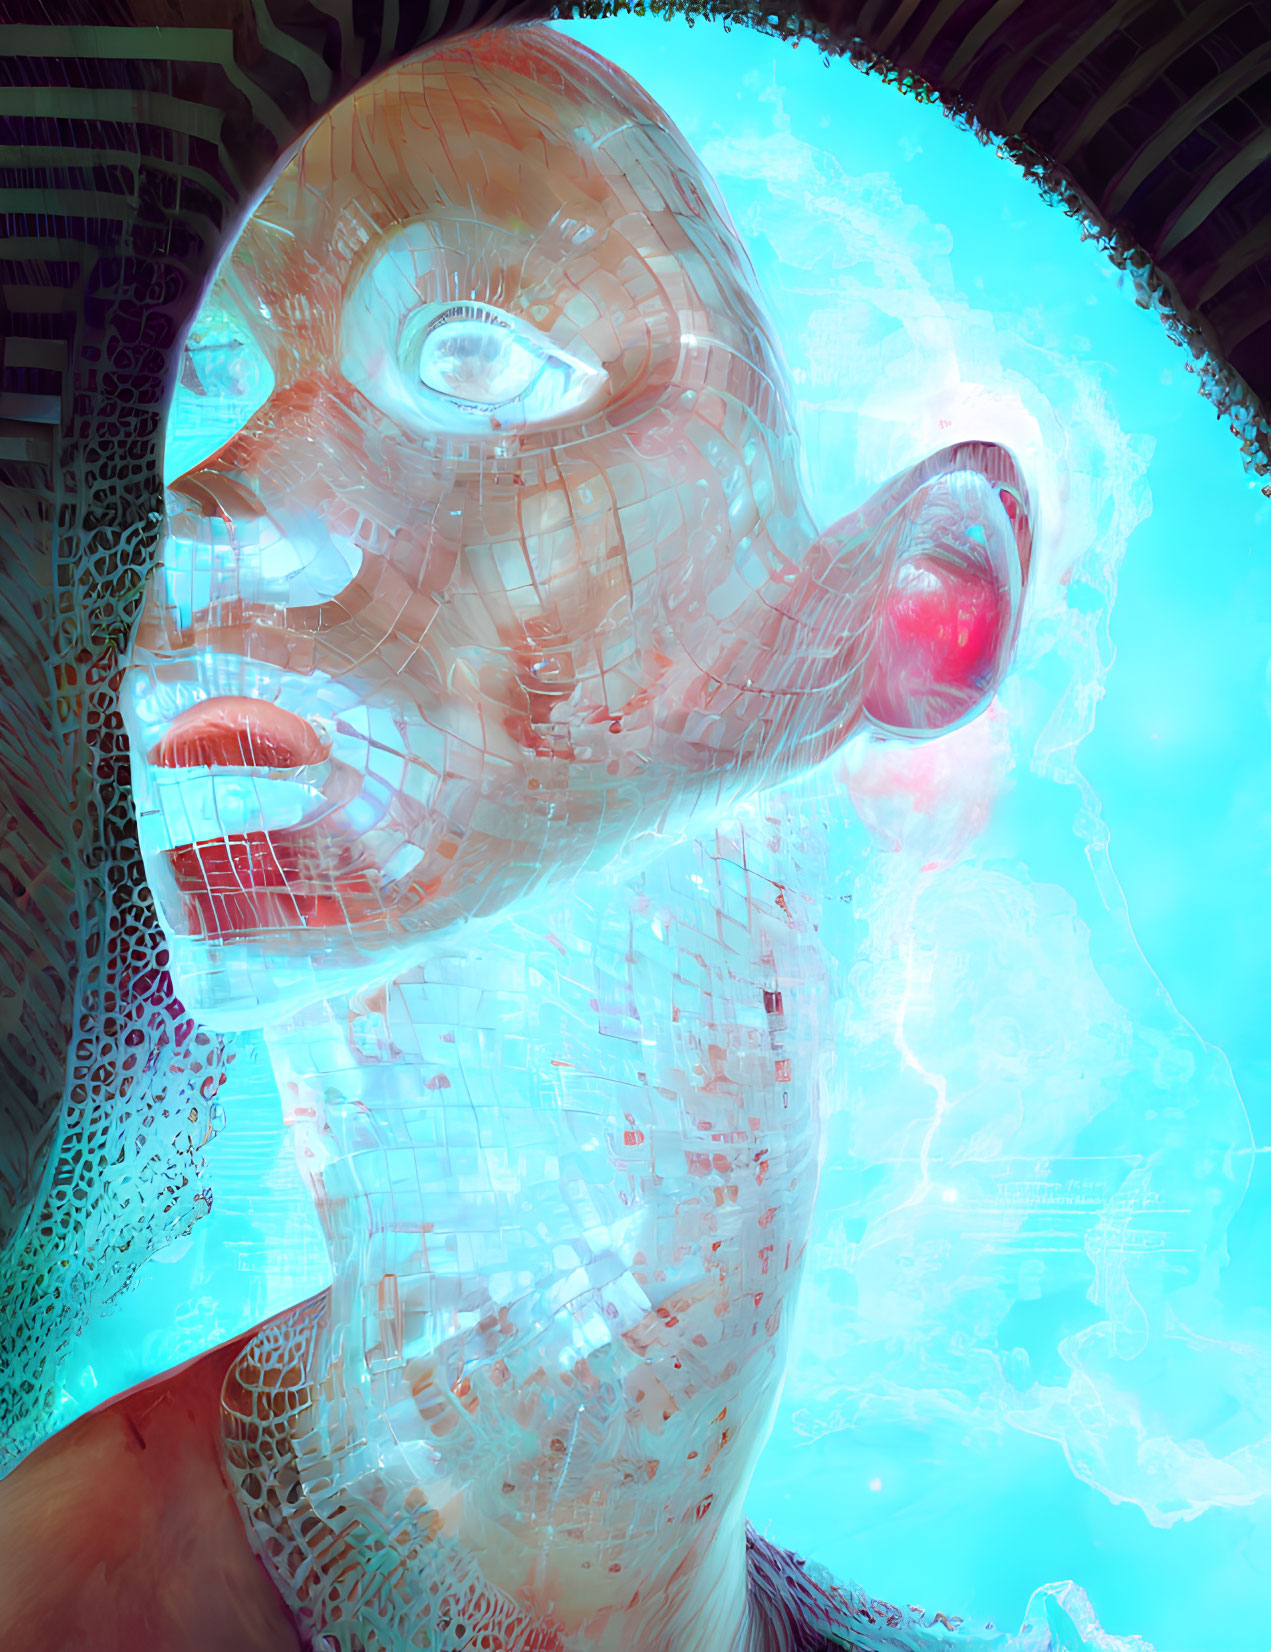 Translucent wireframe humanoid head on abstract blue background